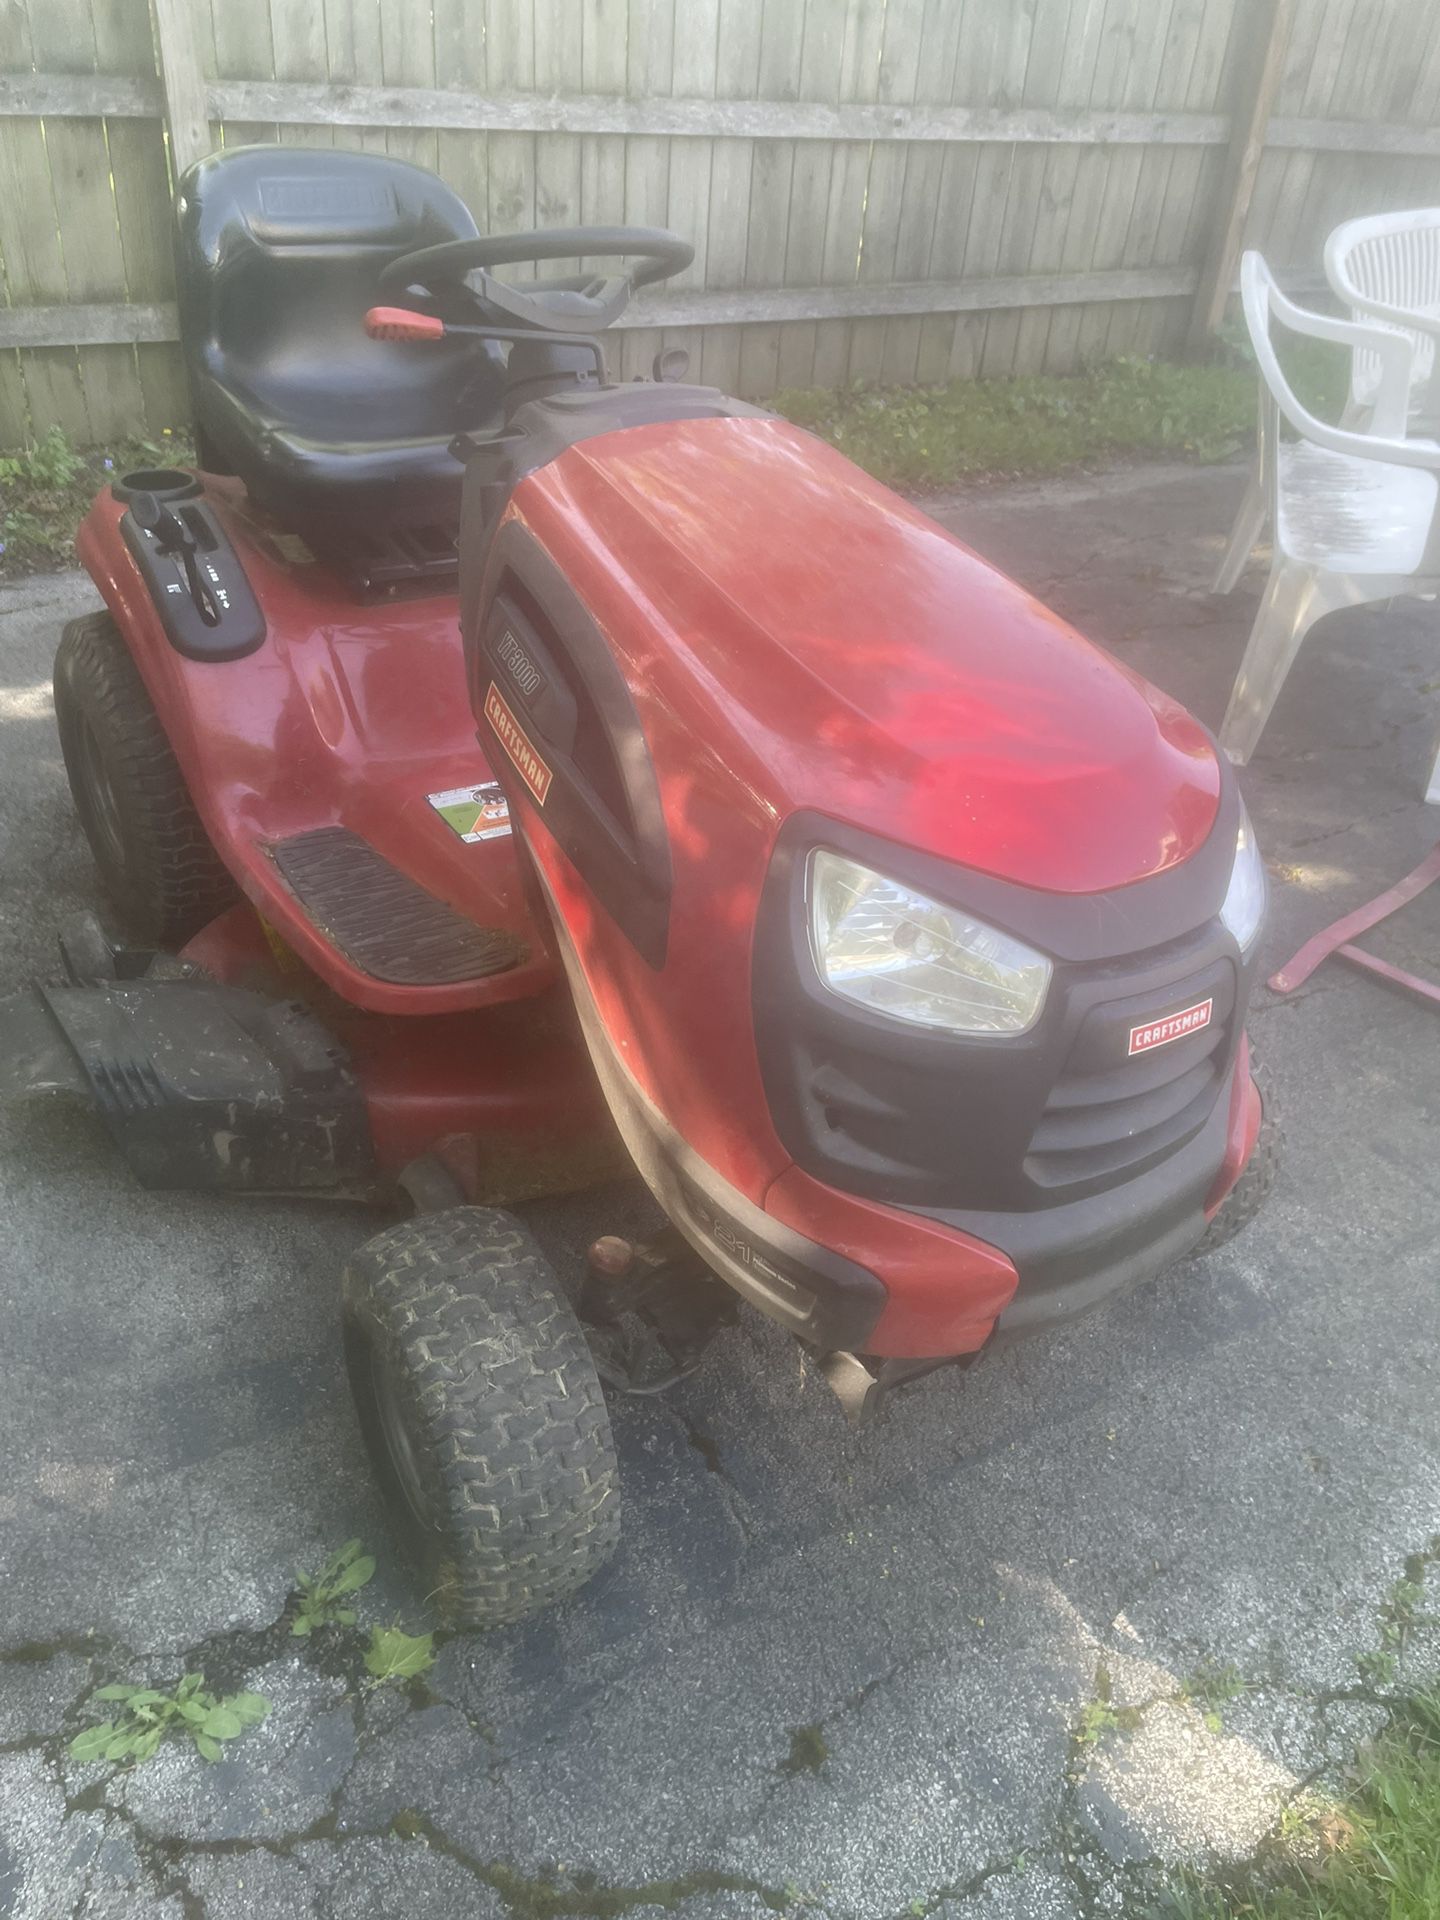 Craftsman Yt3000 Riding Mower With Bagger